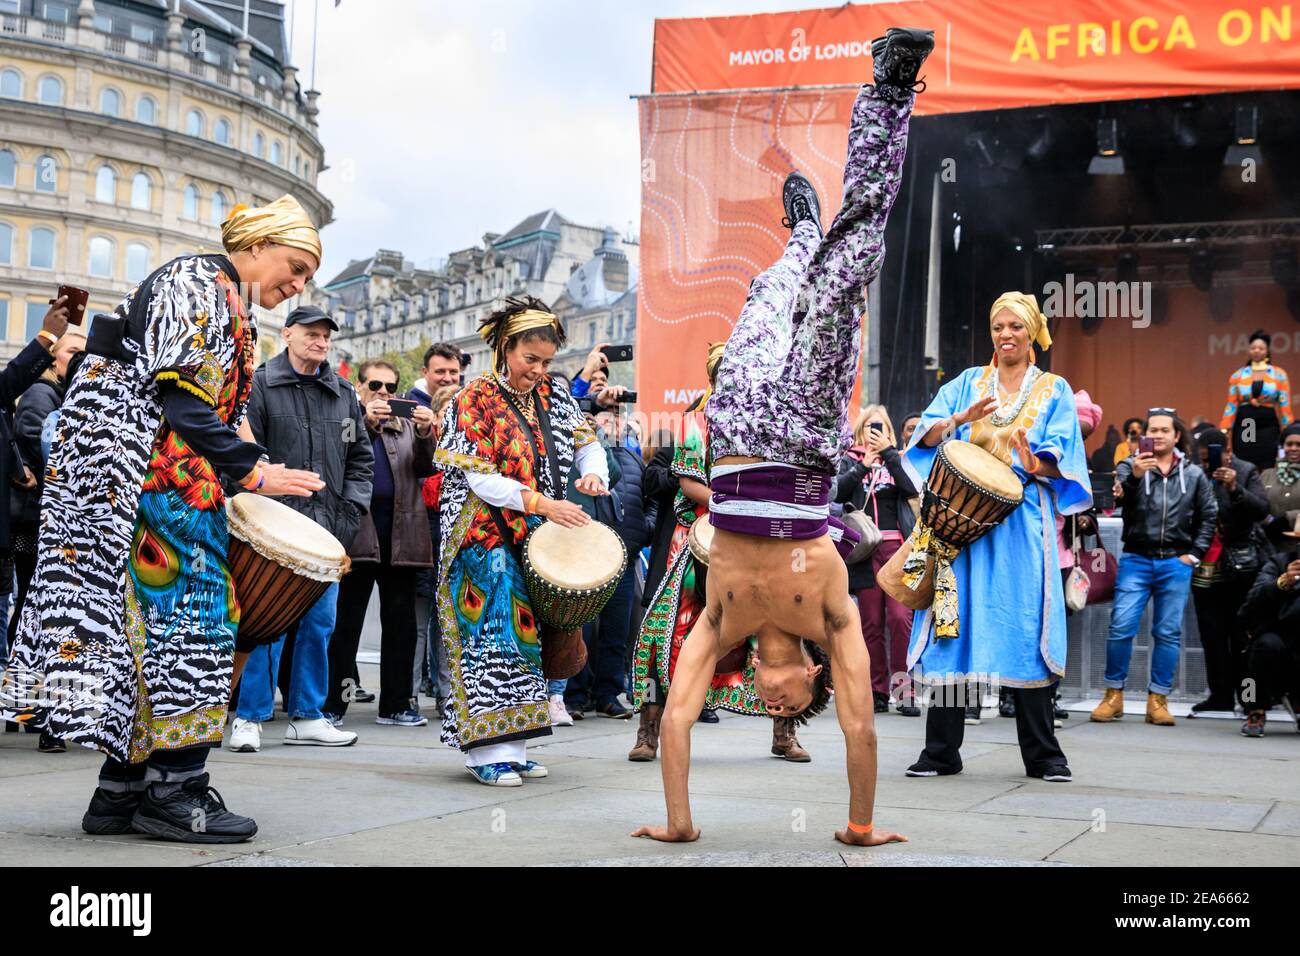 African performance with acrobatic street dance, drumming and dance group in colourful costumes at 'Africa on the Square', Trafalgar Square, London Stock Photo